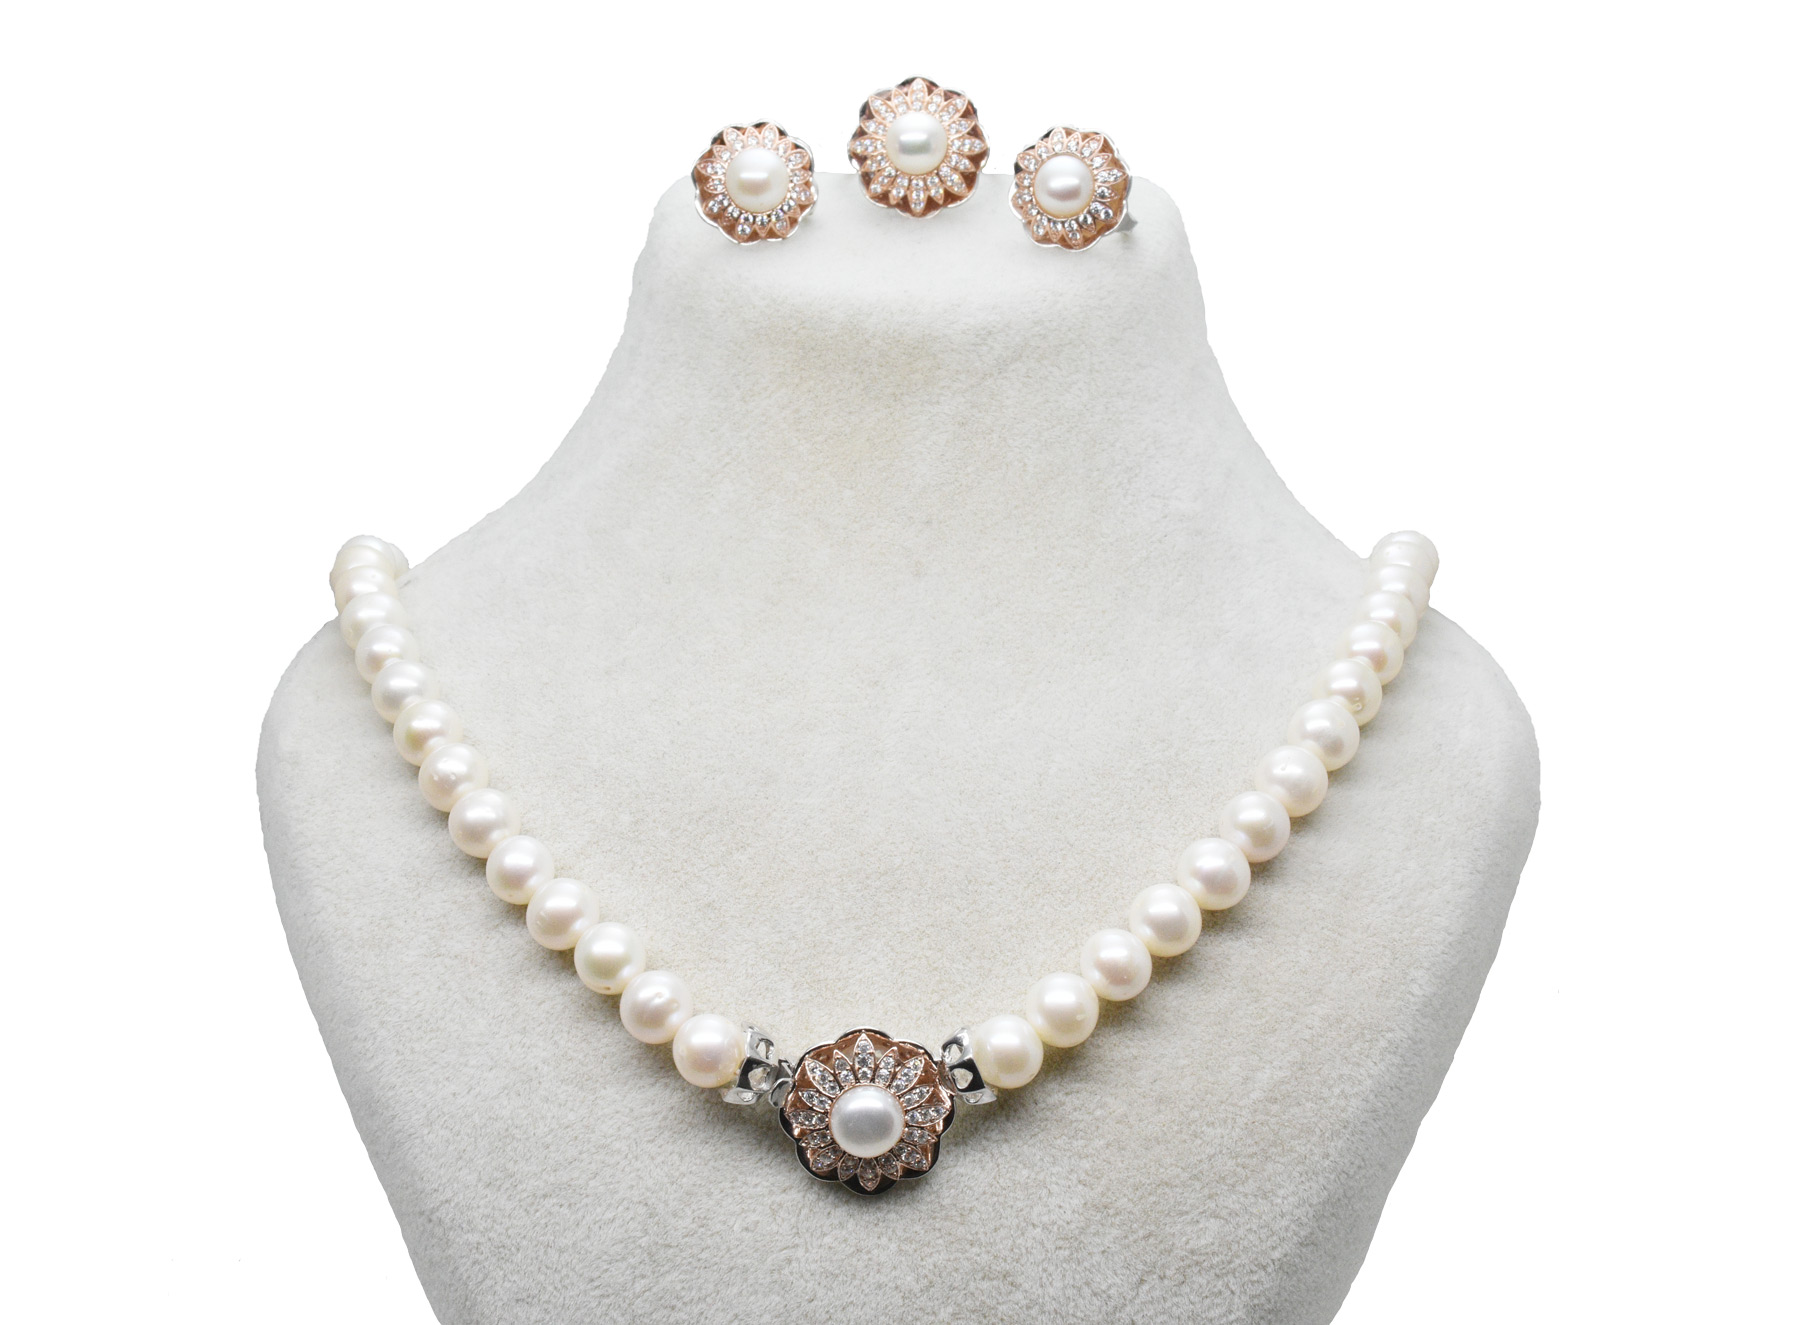 Ahsen 925 Sterling Silver White Pearl Necklace AH-0143 - 2